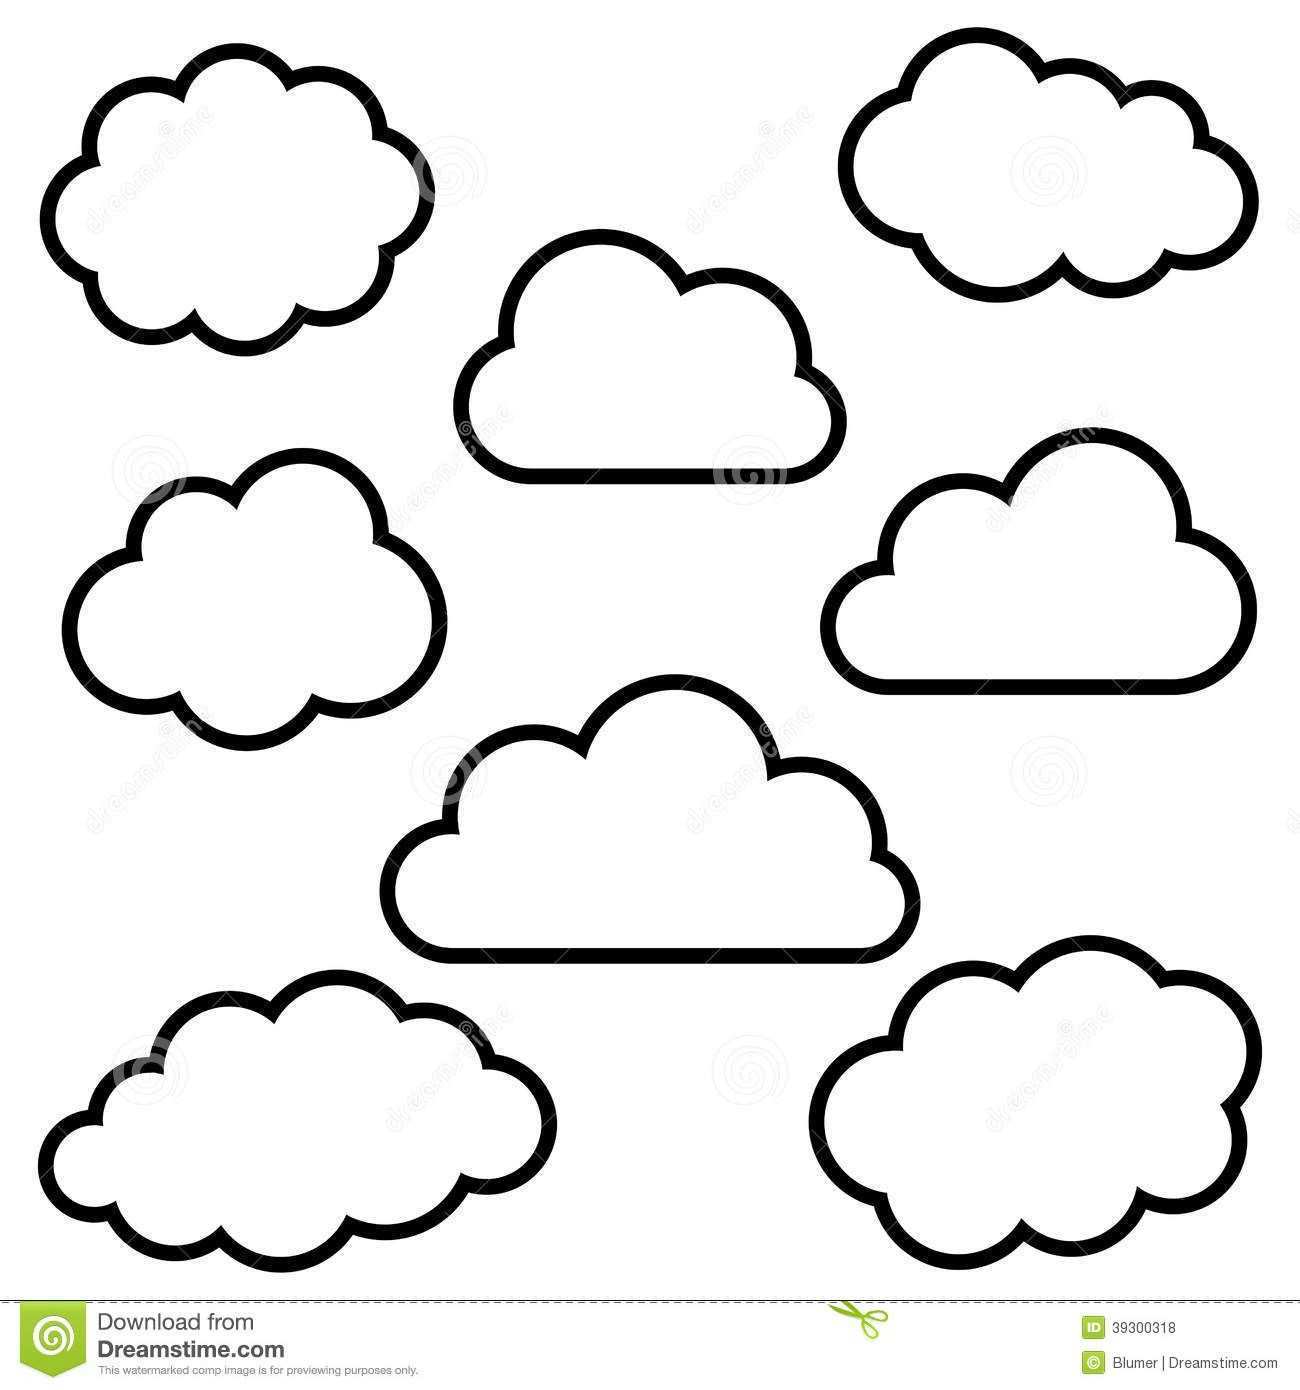 Free Download Sky Clouds Outline Clipart For Your Creation Cloud Outline Cloud Stencil Cloud Template